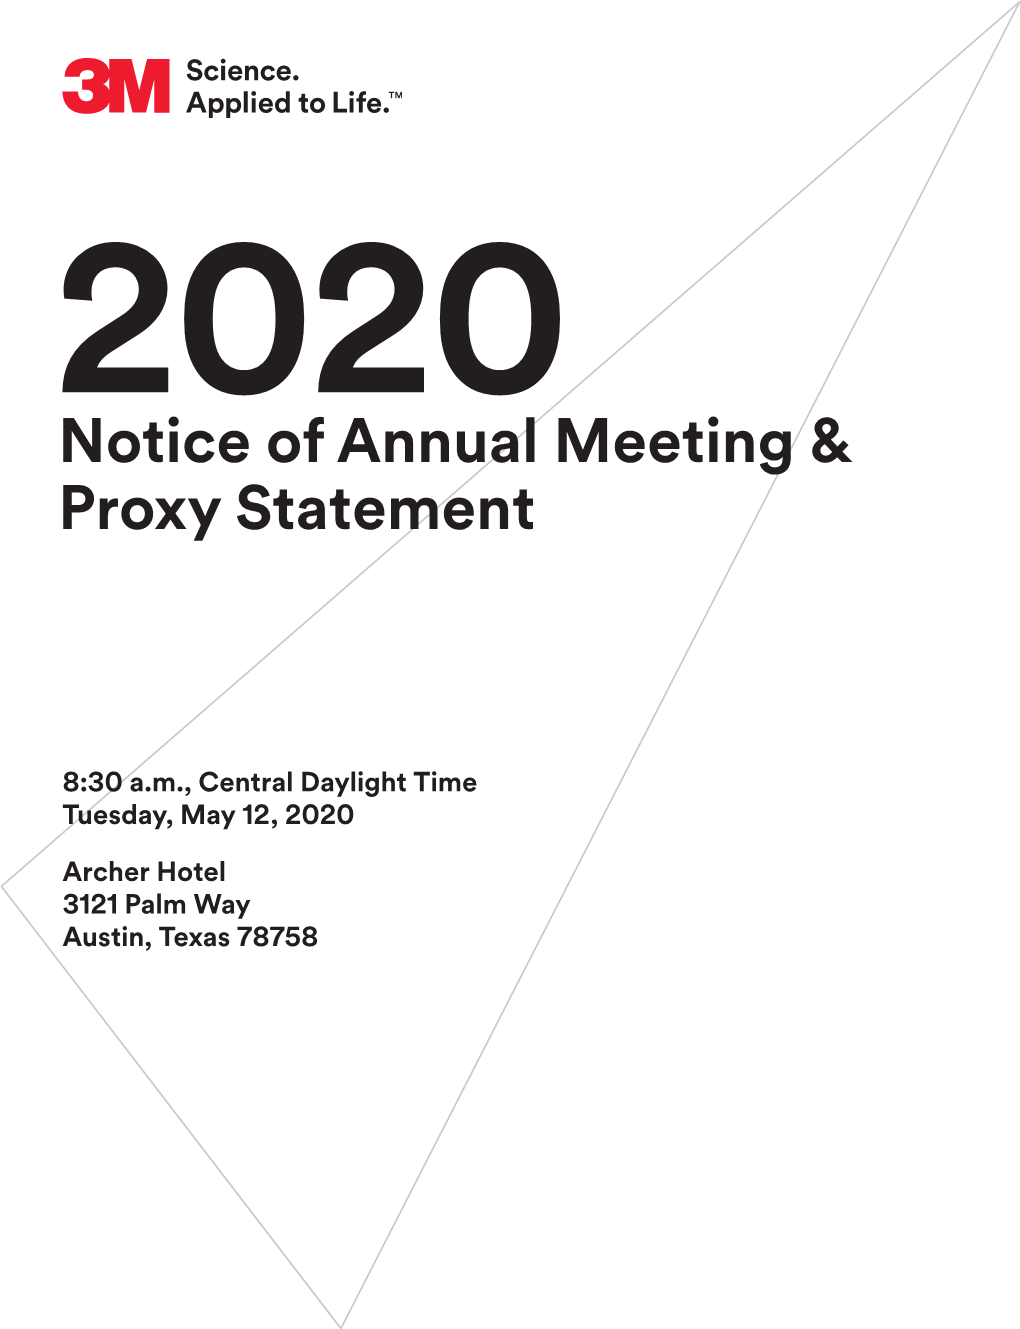 Notice of Annual Meeting & Proxy Statement